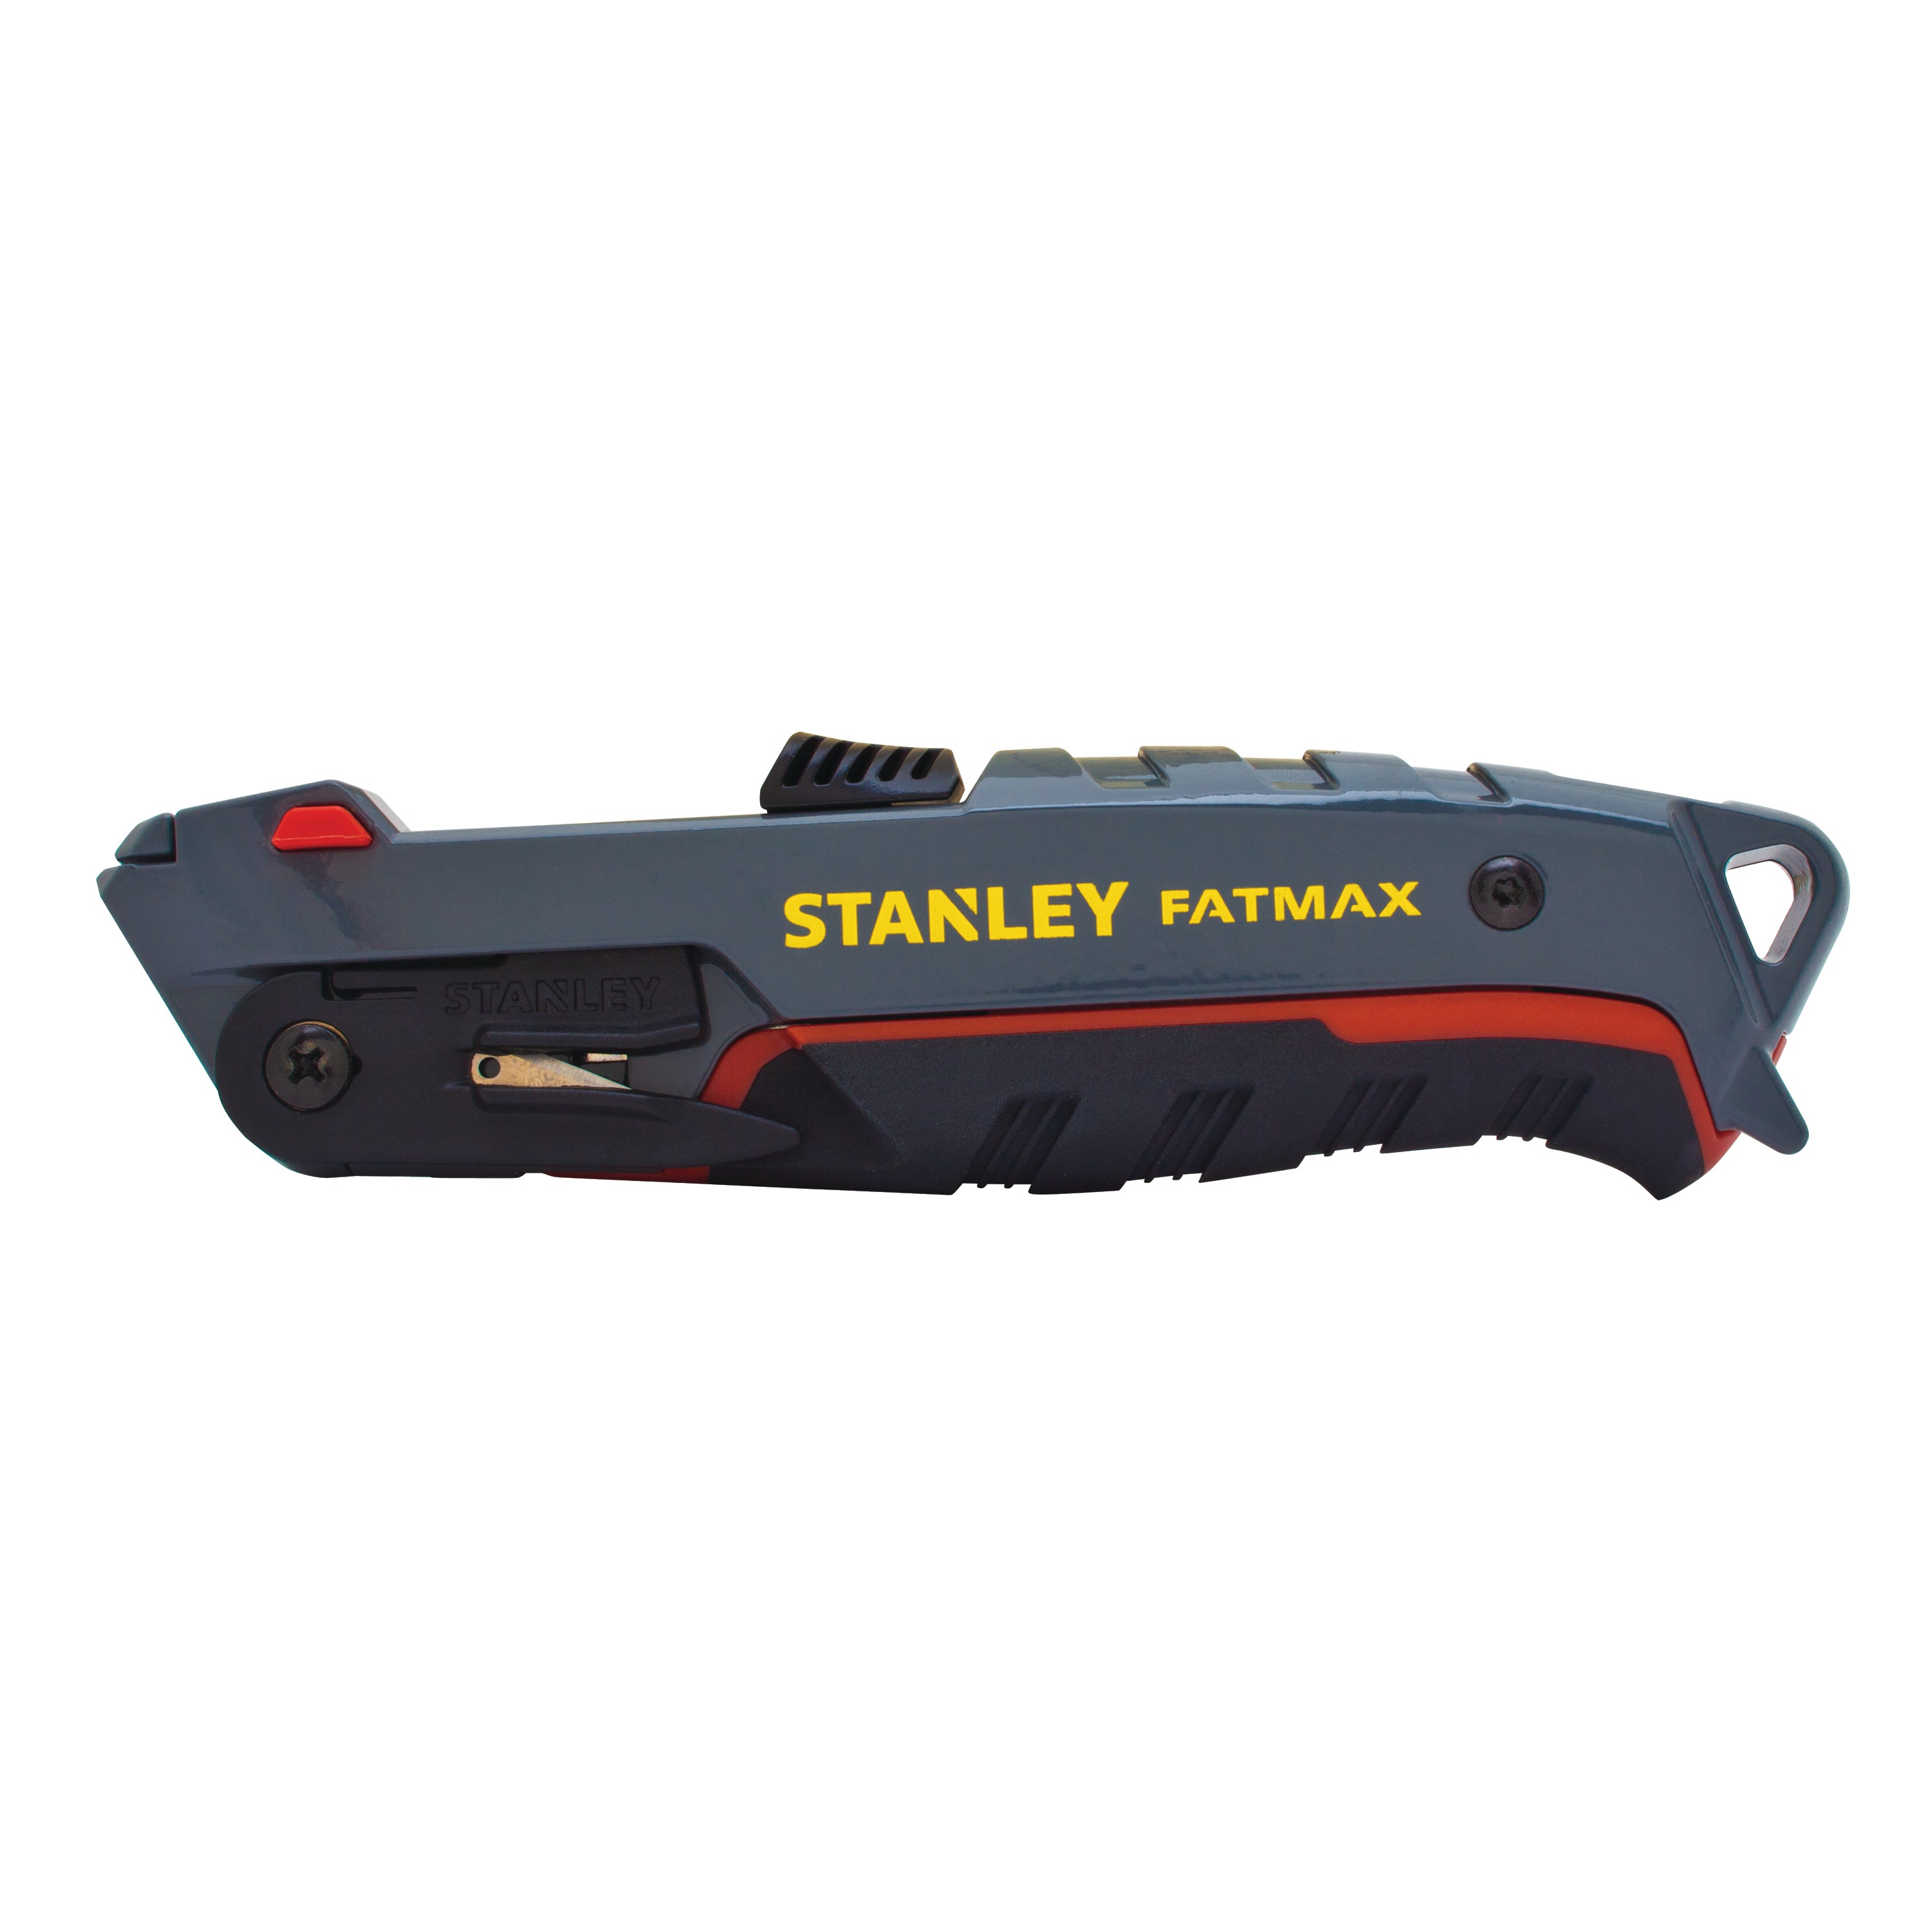 Fatmax Premium Auto Retract Top Slide Safety Knife Fmht10242